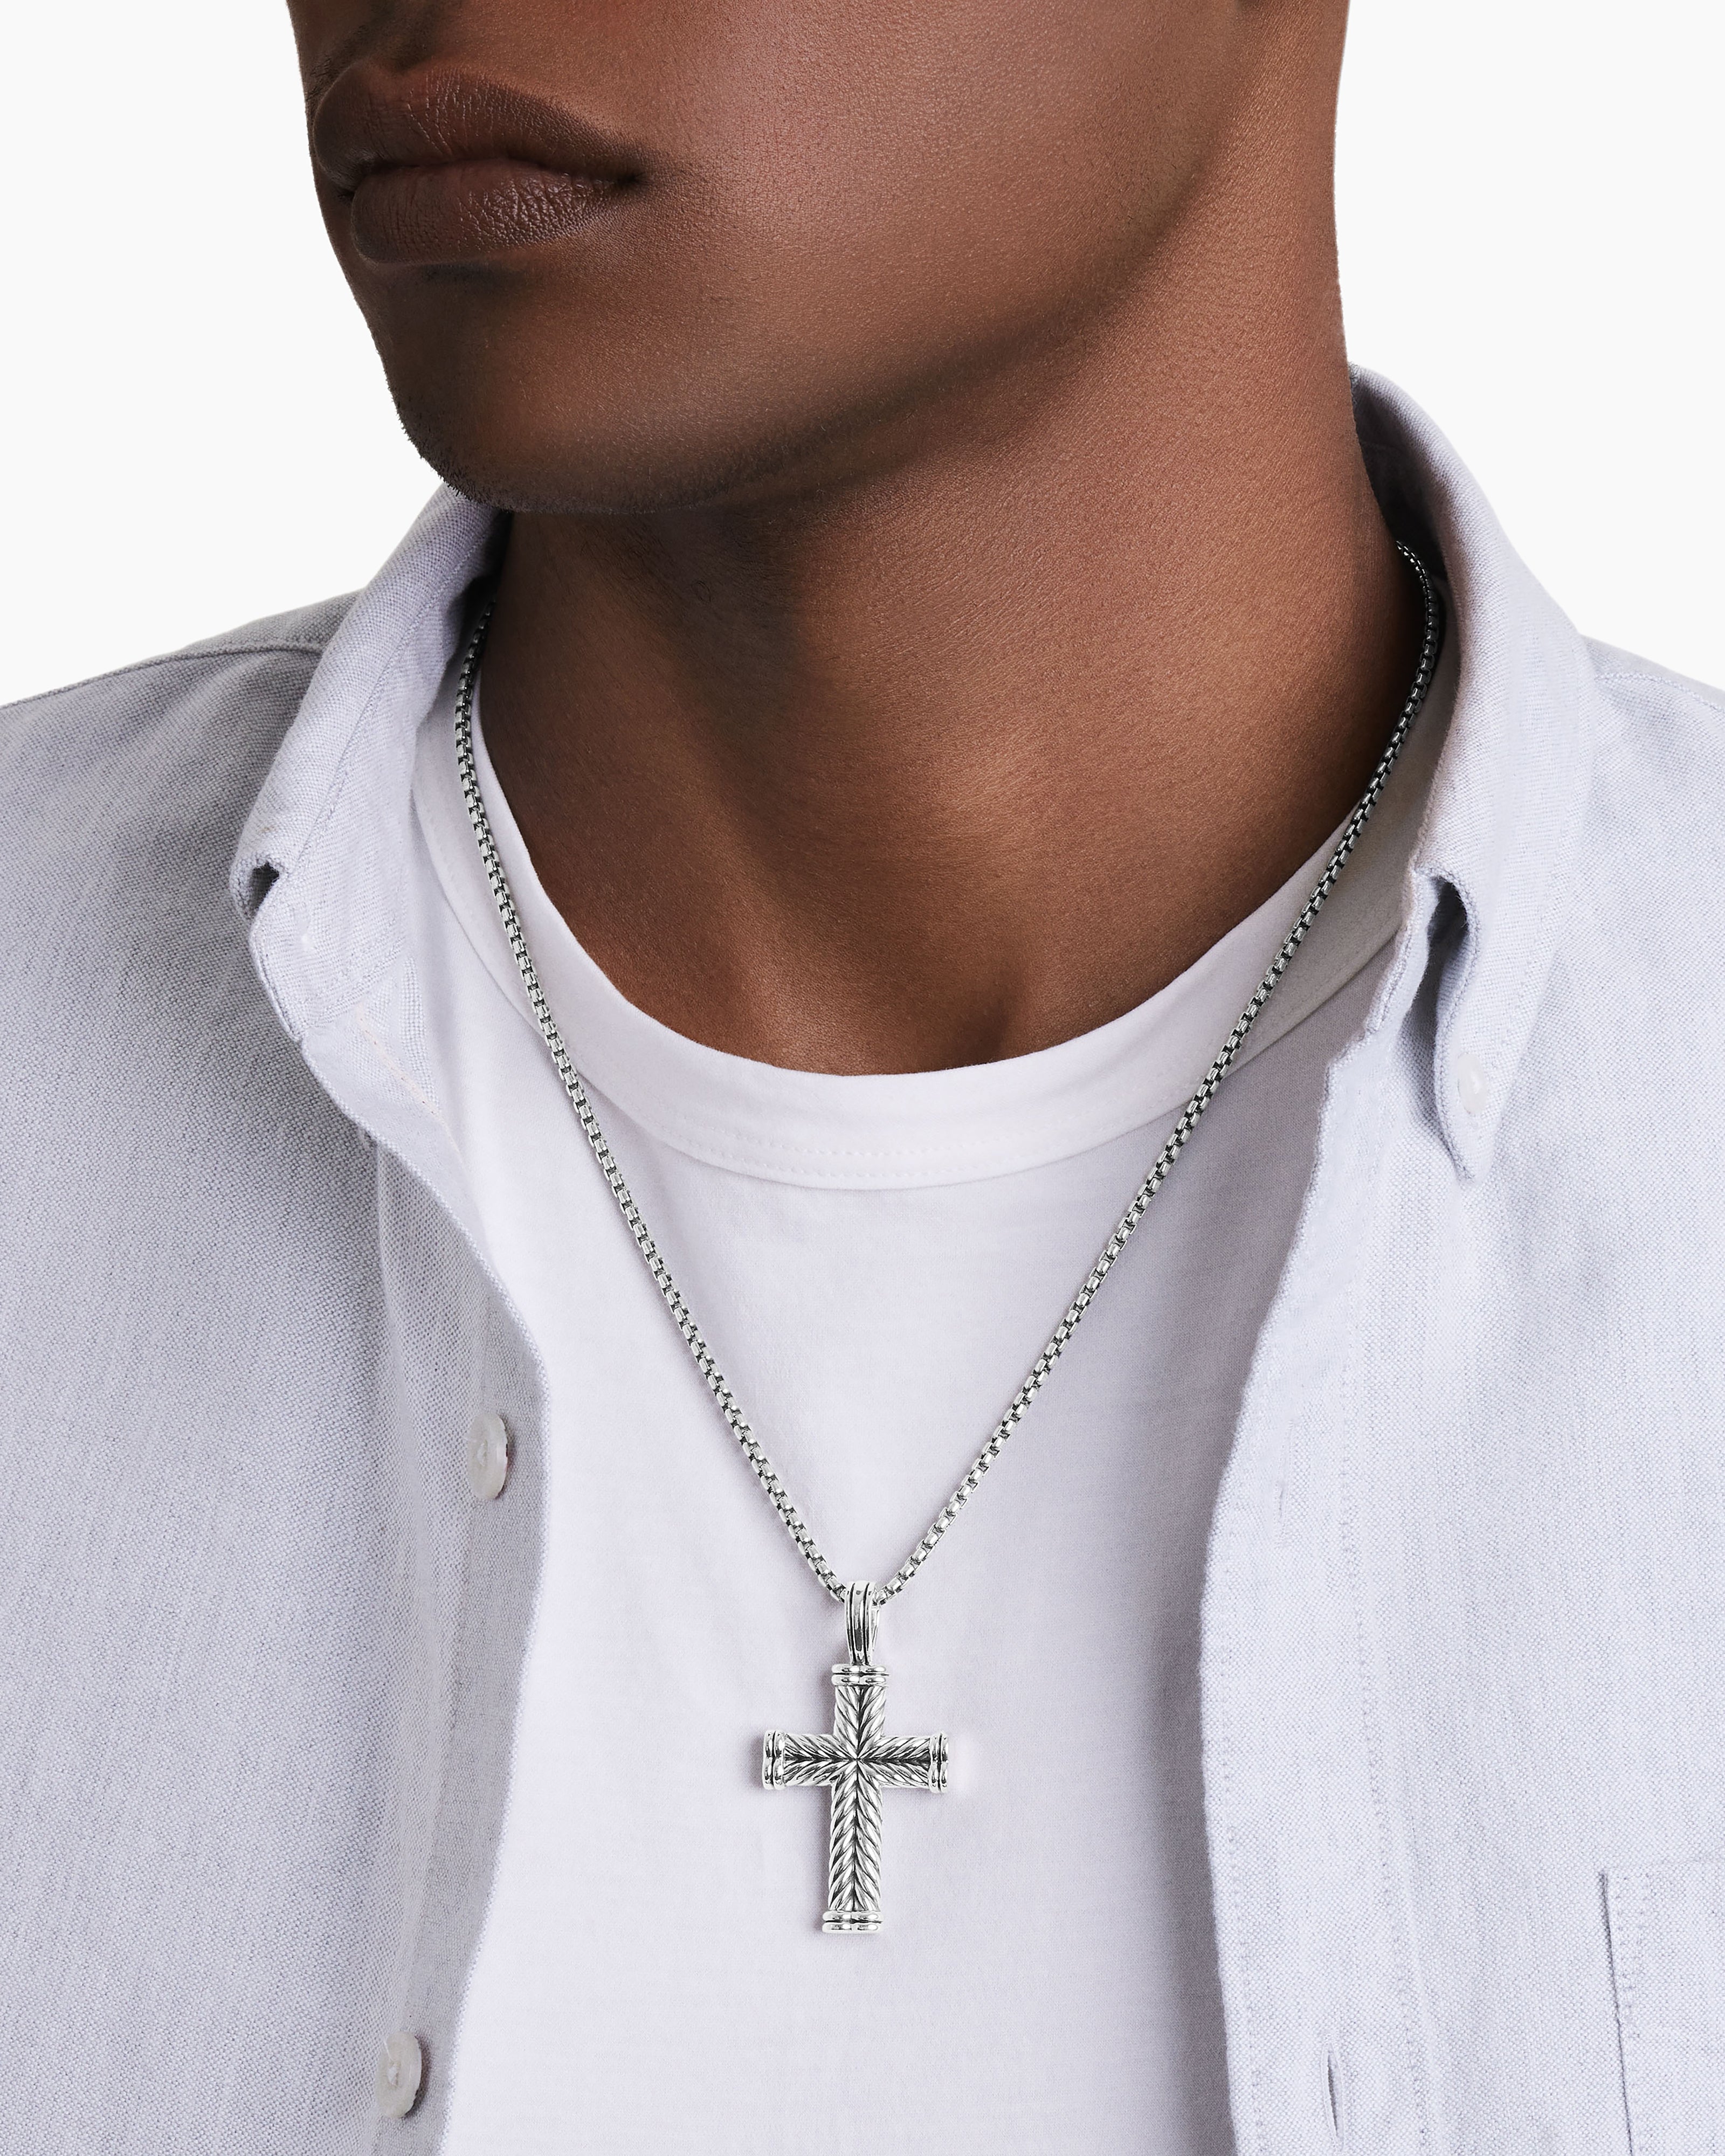 Buy Sterling Silver Cross Pendant Necklace for Men on 925 Silver Rope Chain  Catholic Cross, Confirmation Gifts, First Communion. Man Jewelry. Online in  India - Etsy